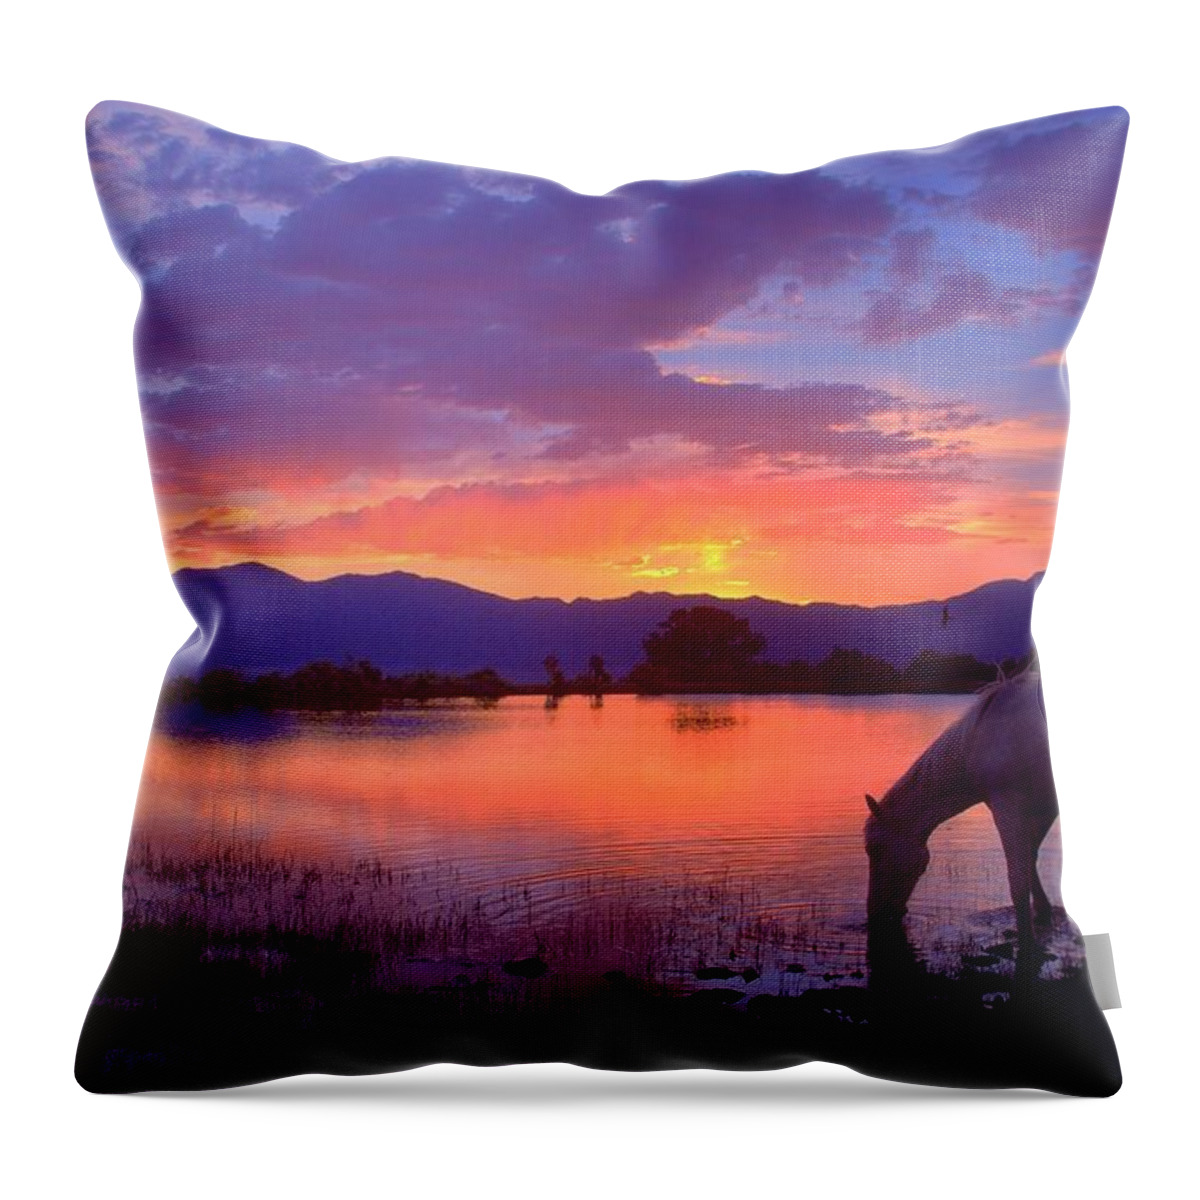 Wild Horse Throw Pillow featuring the photograph A Place To Be by Jeanne Bencich-Nations